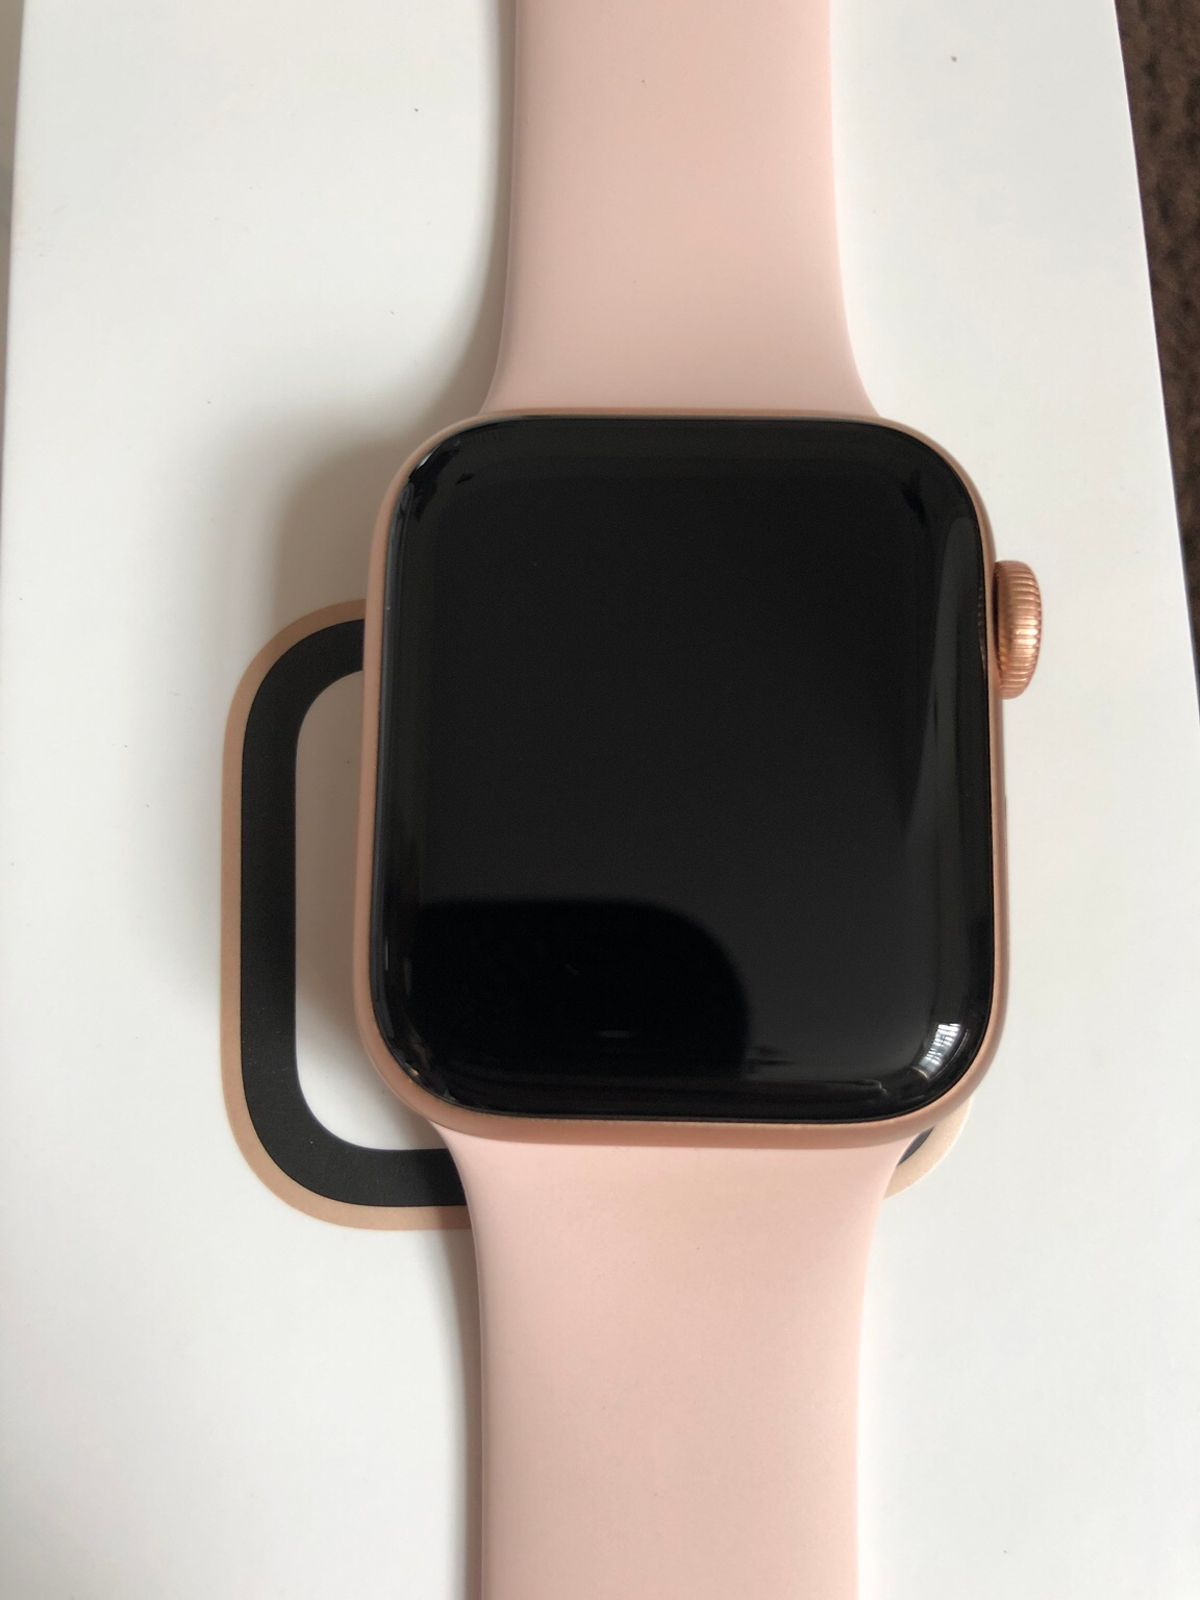 Apple Watch Series 4 Cellular 40mm Rose Gold